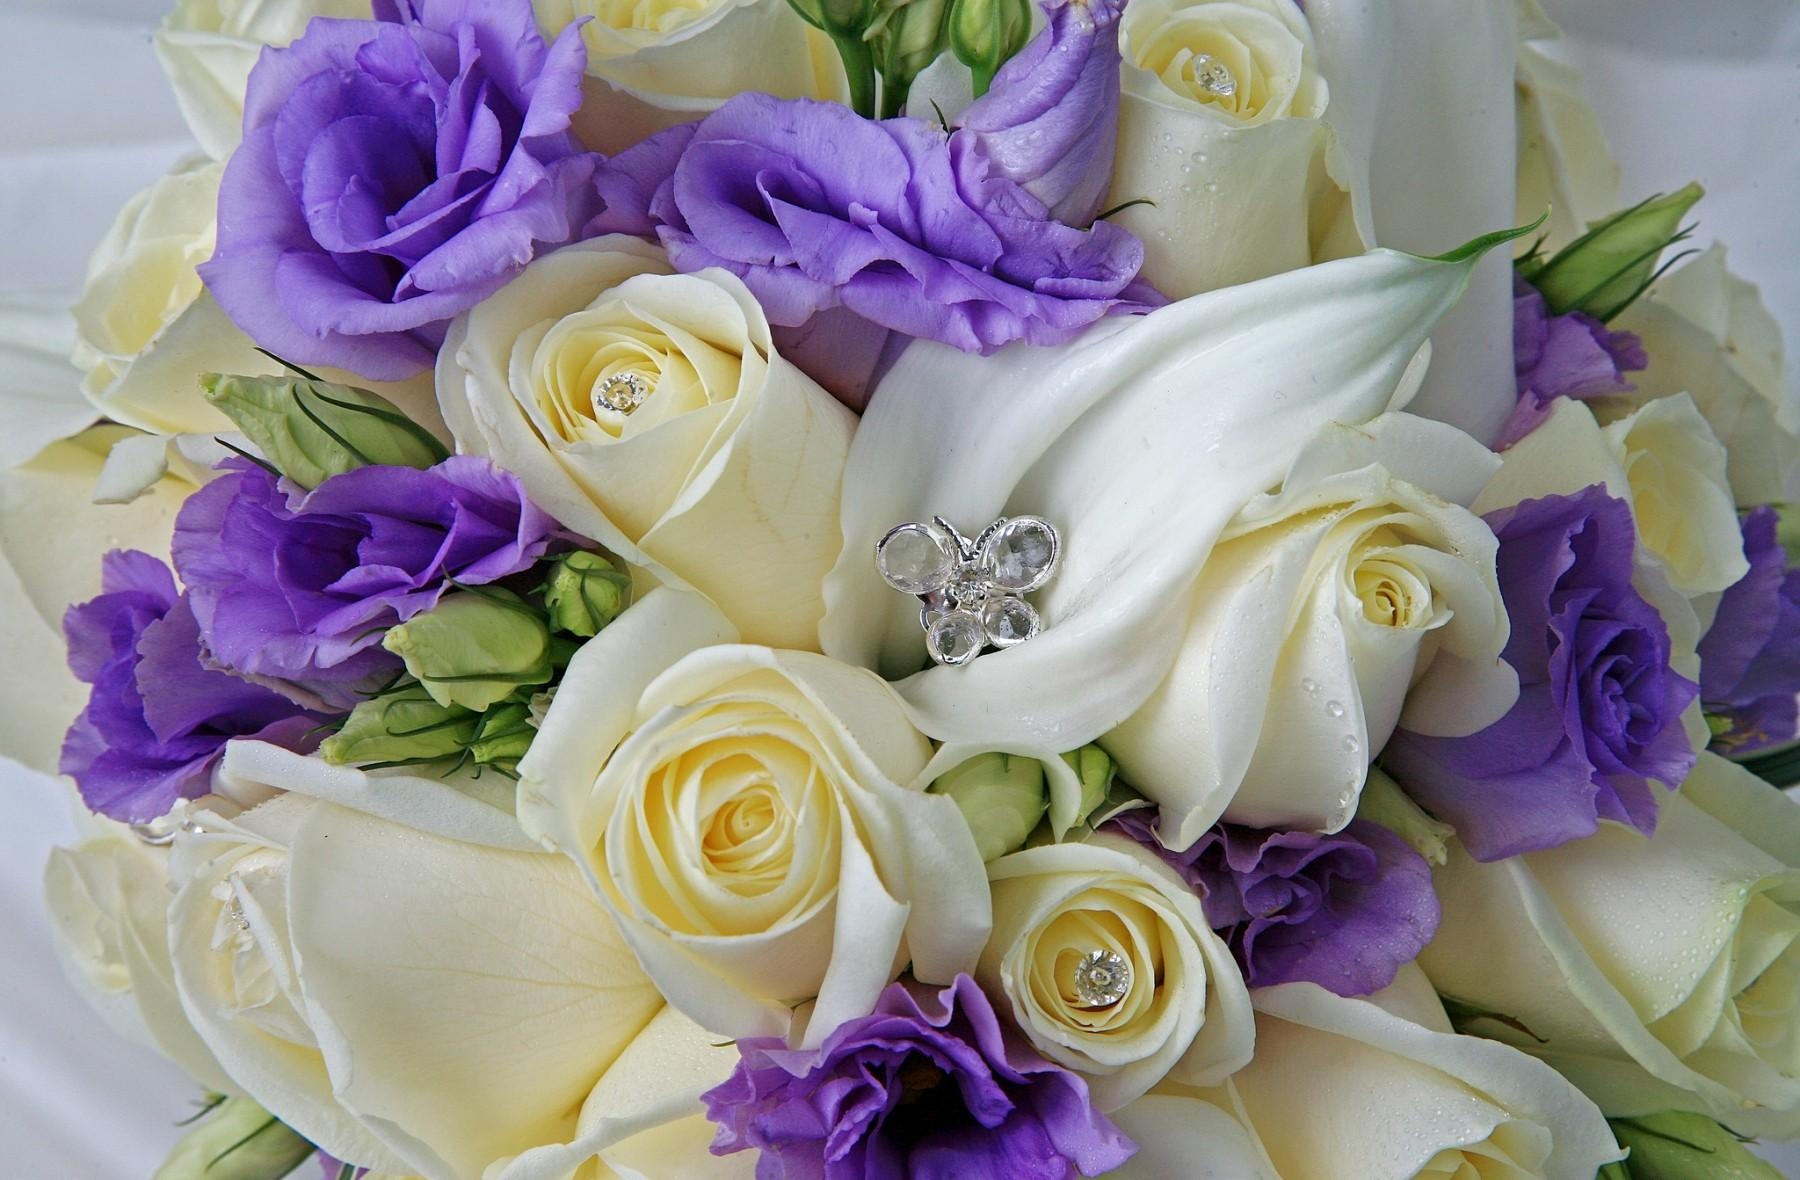 drops, roses, flowers, decorations, bouquet, lisiantus russell, lisianthus russell phone wallpaper